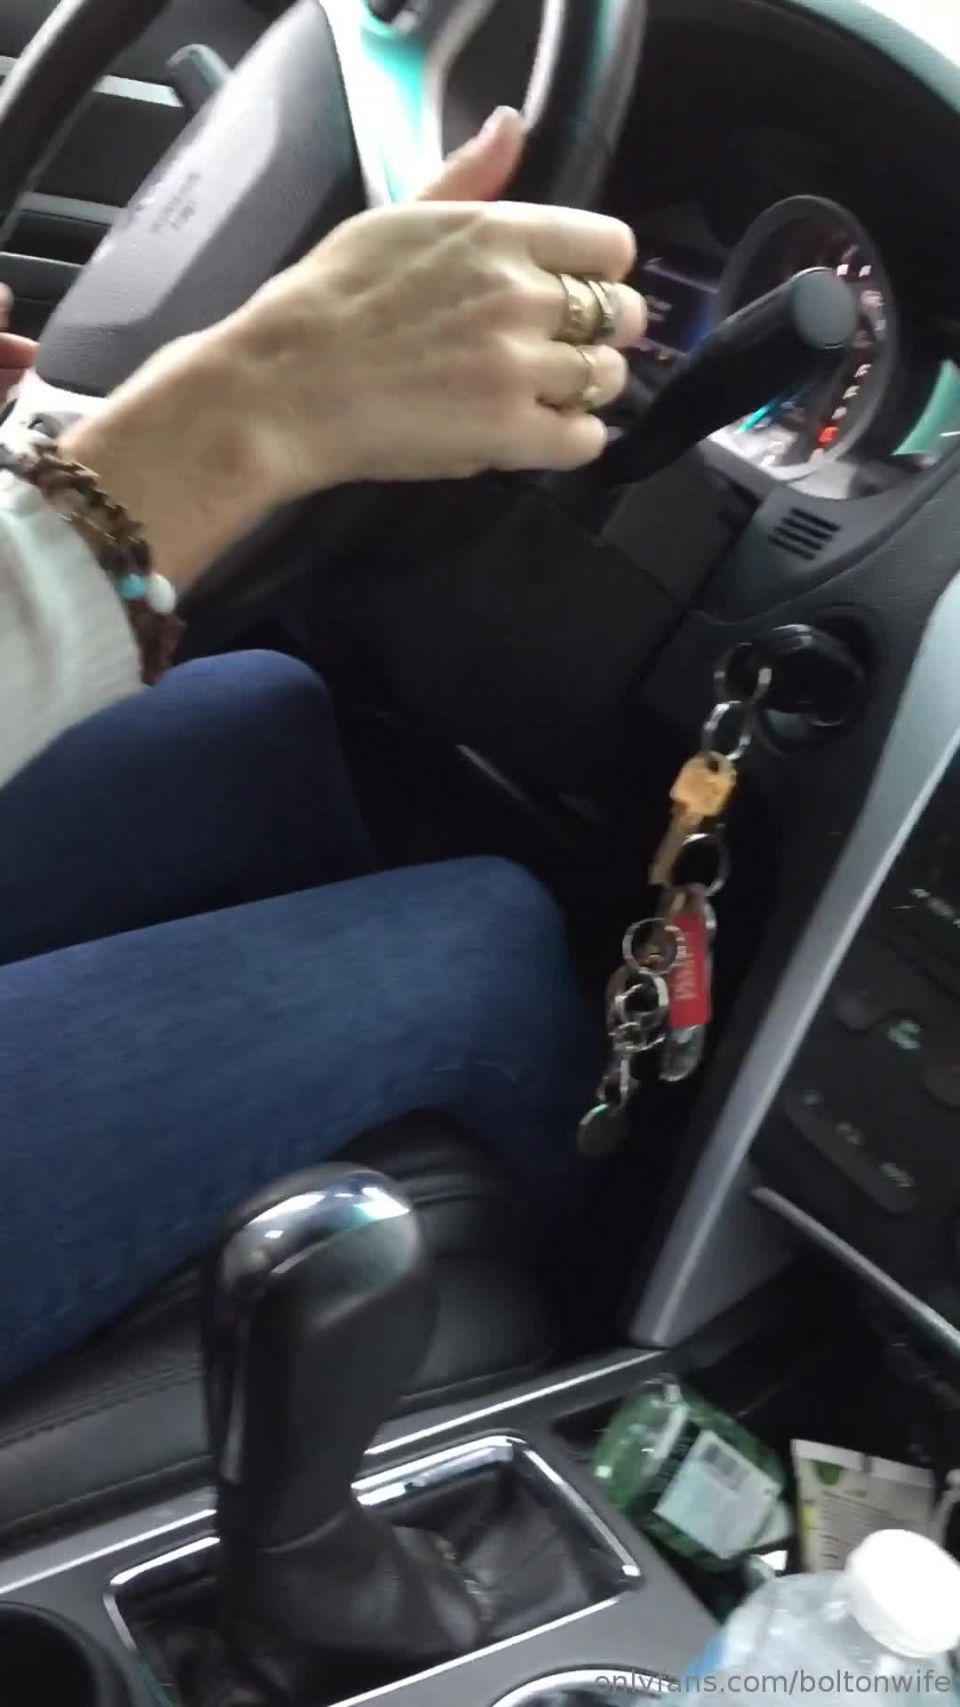 [Onlyfans] boltonwife-12-06-2019-7548590-Just driving around with my tits out